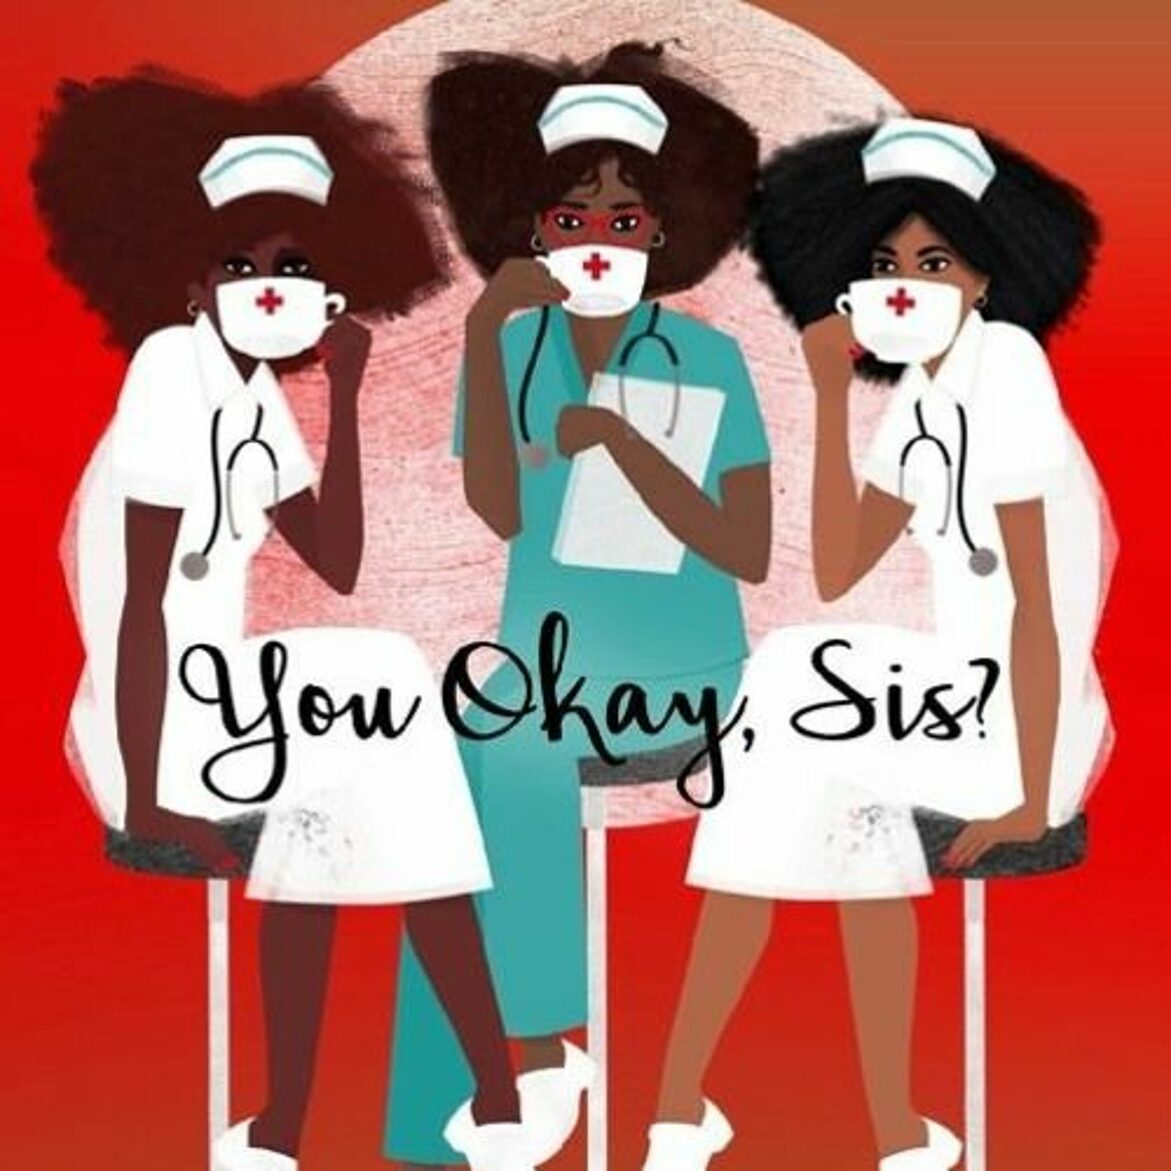 Black Podcasting - You Okay, Sis? Black Healthcare Workers & COVID-19